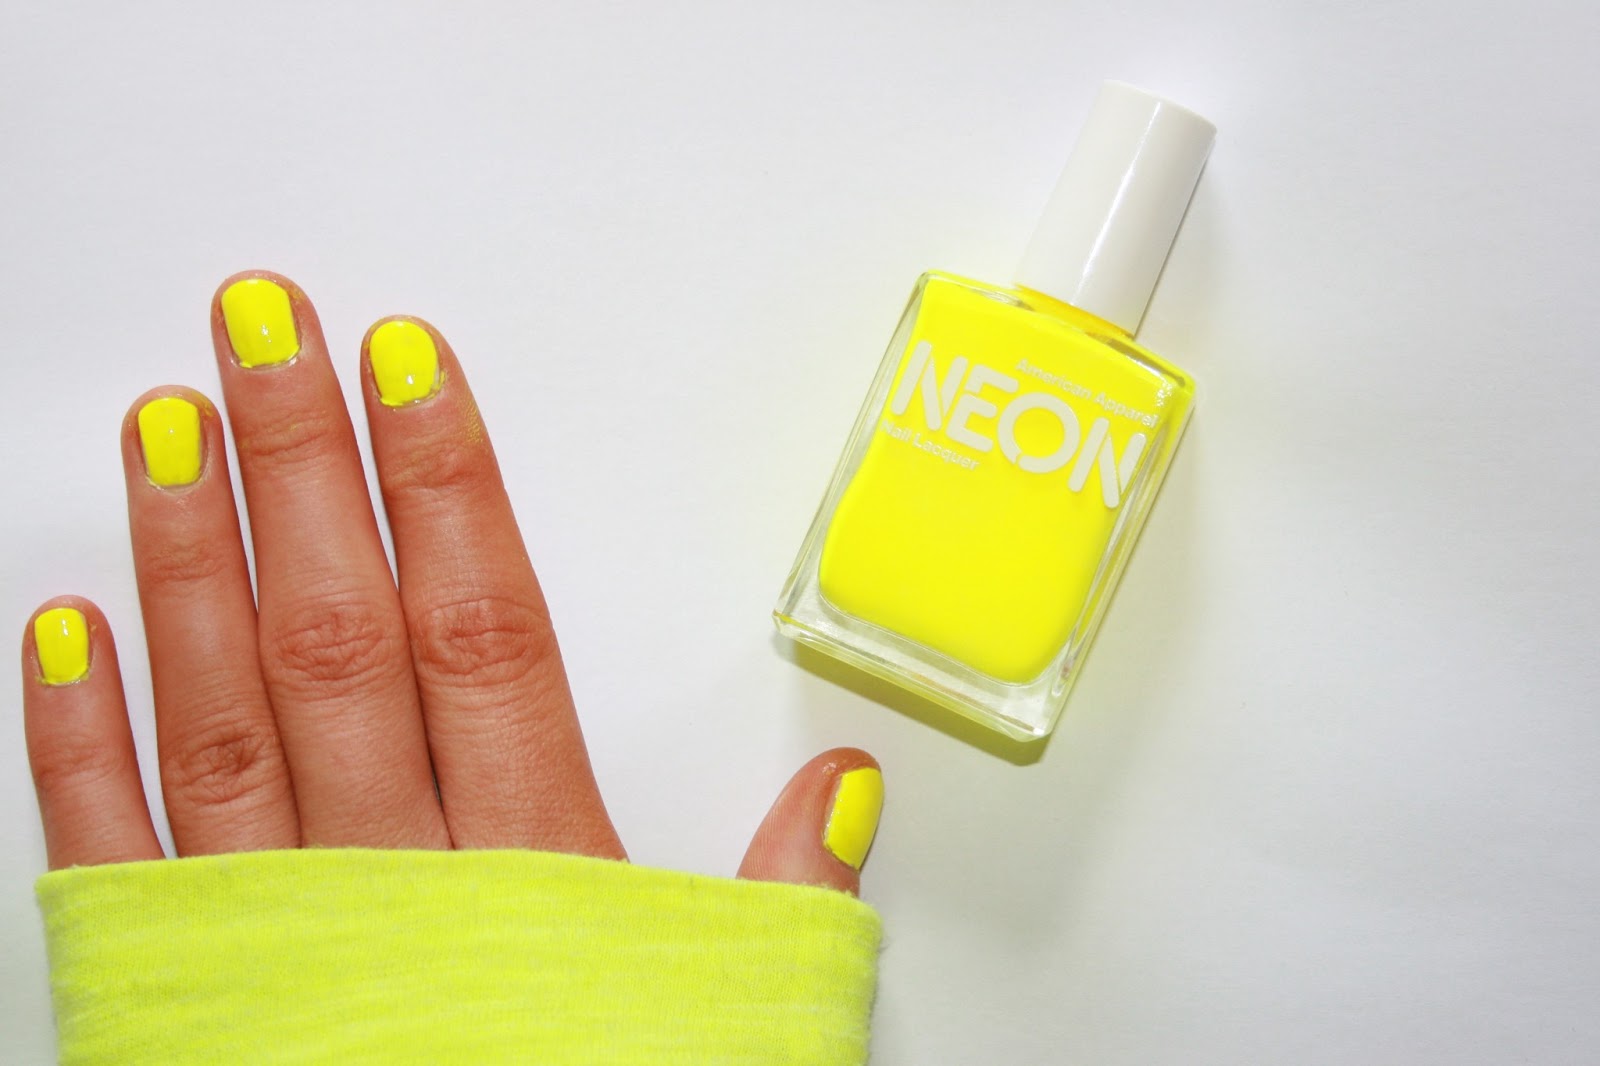 Pretty Little Obsessions | UK Beauty Blog: American Apparel Nail ...